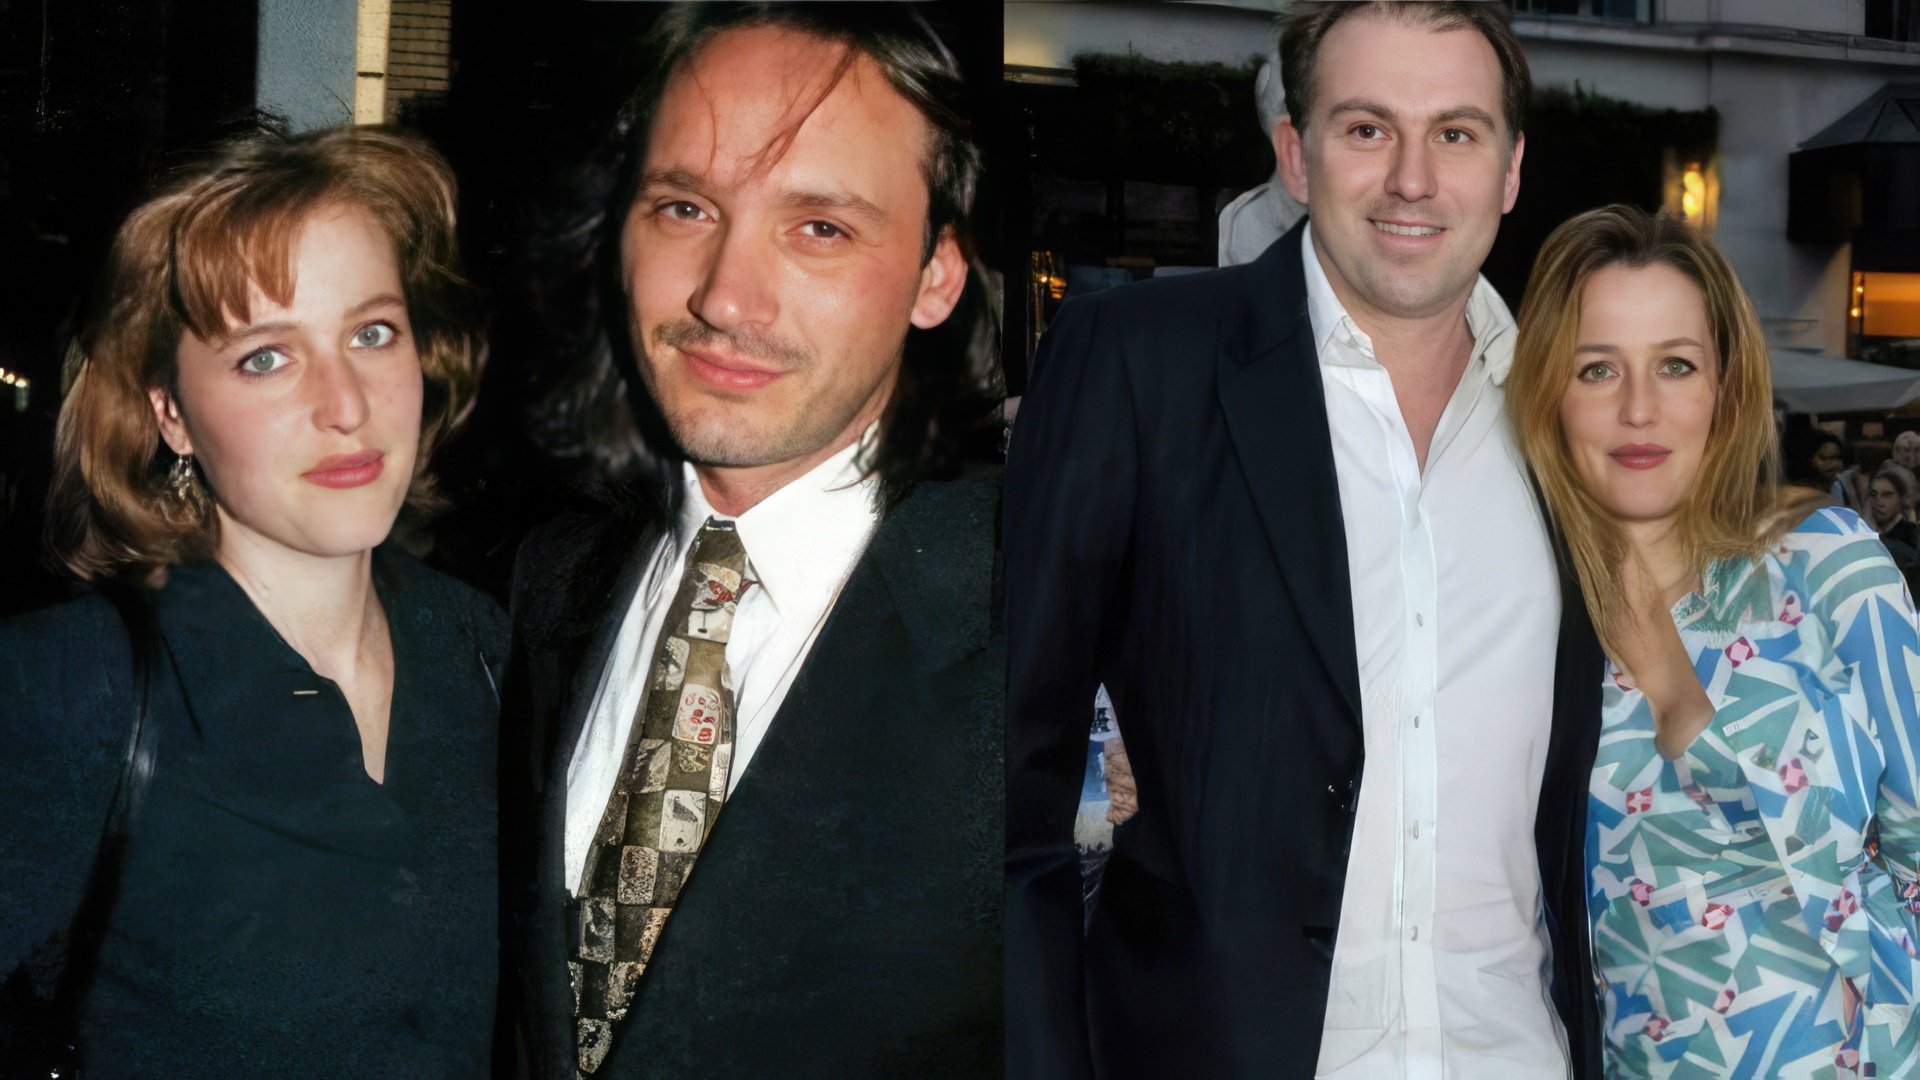 Left: Gillian Anderson first husband; right: her common-law husband Mark Griffiths